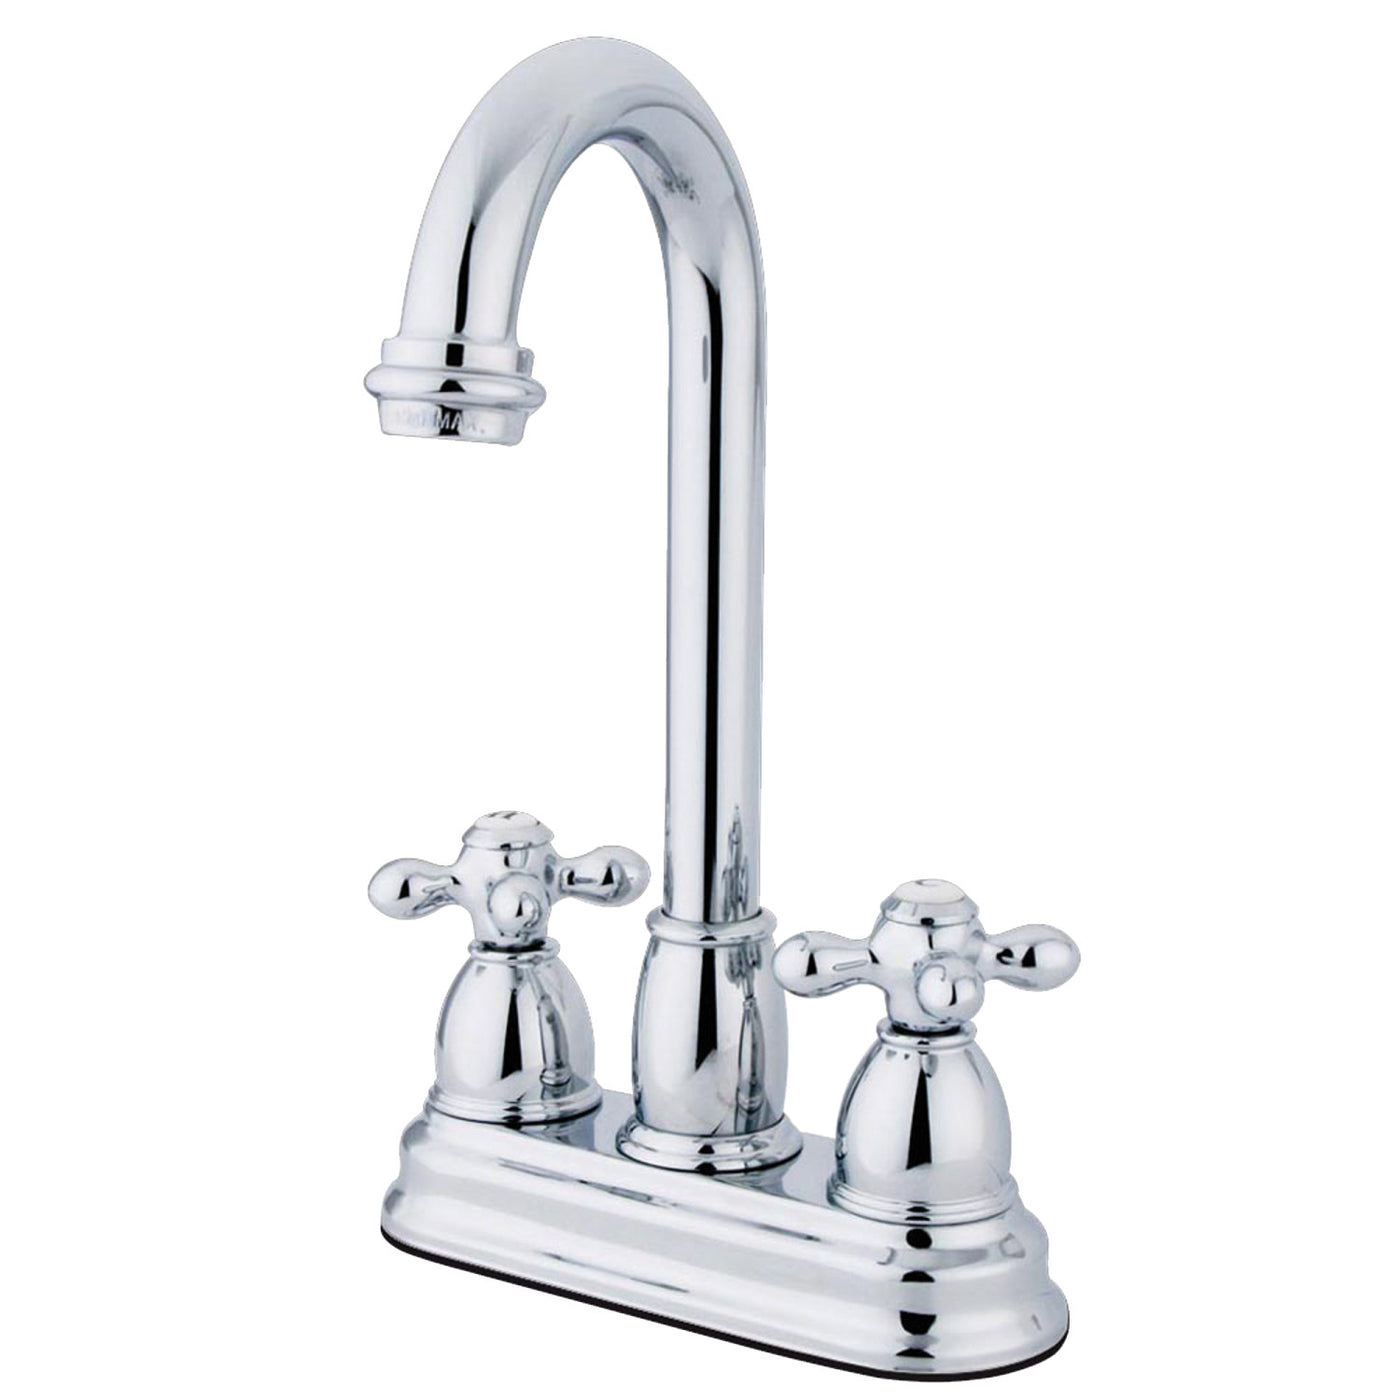 Elements of Design EB3491AX 4-Inch Centerset Bar Faucet, Polished Chrome